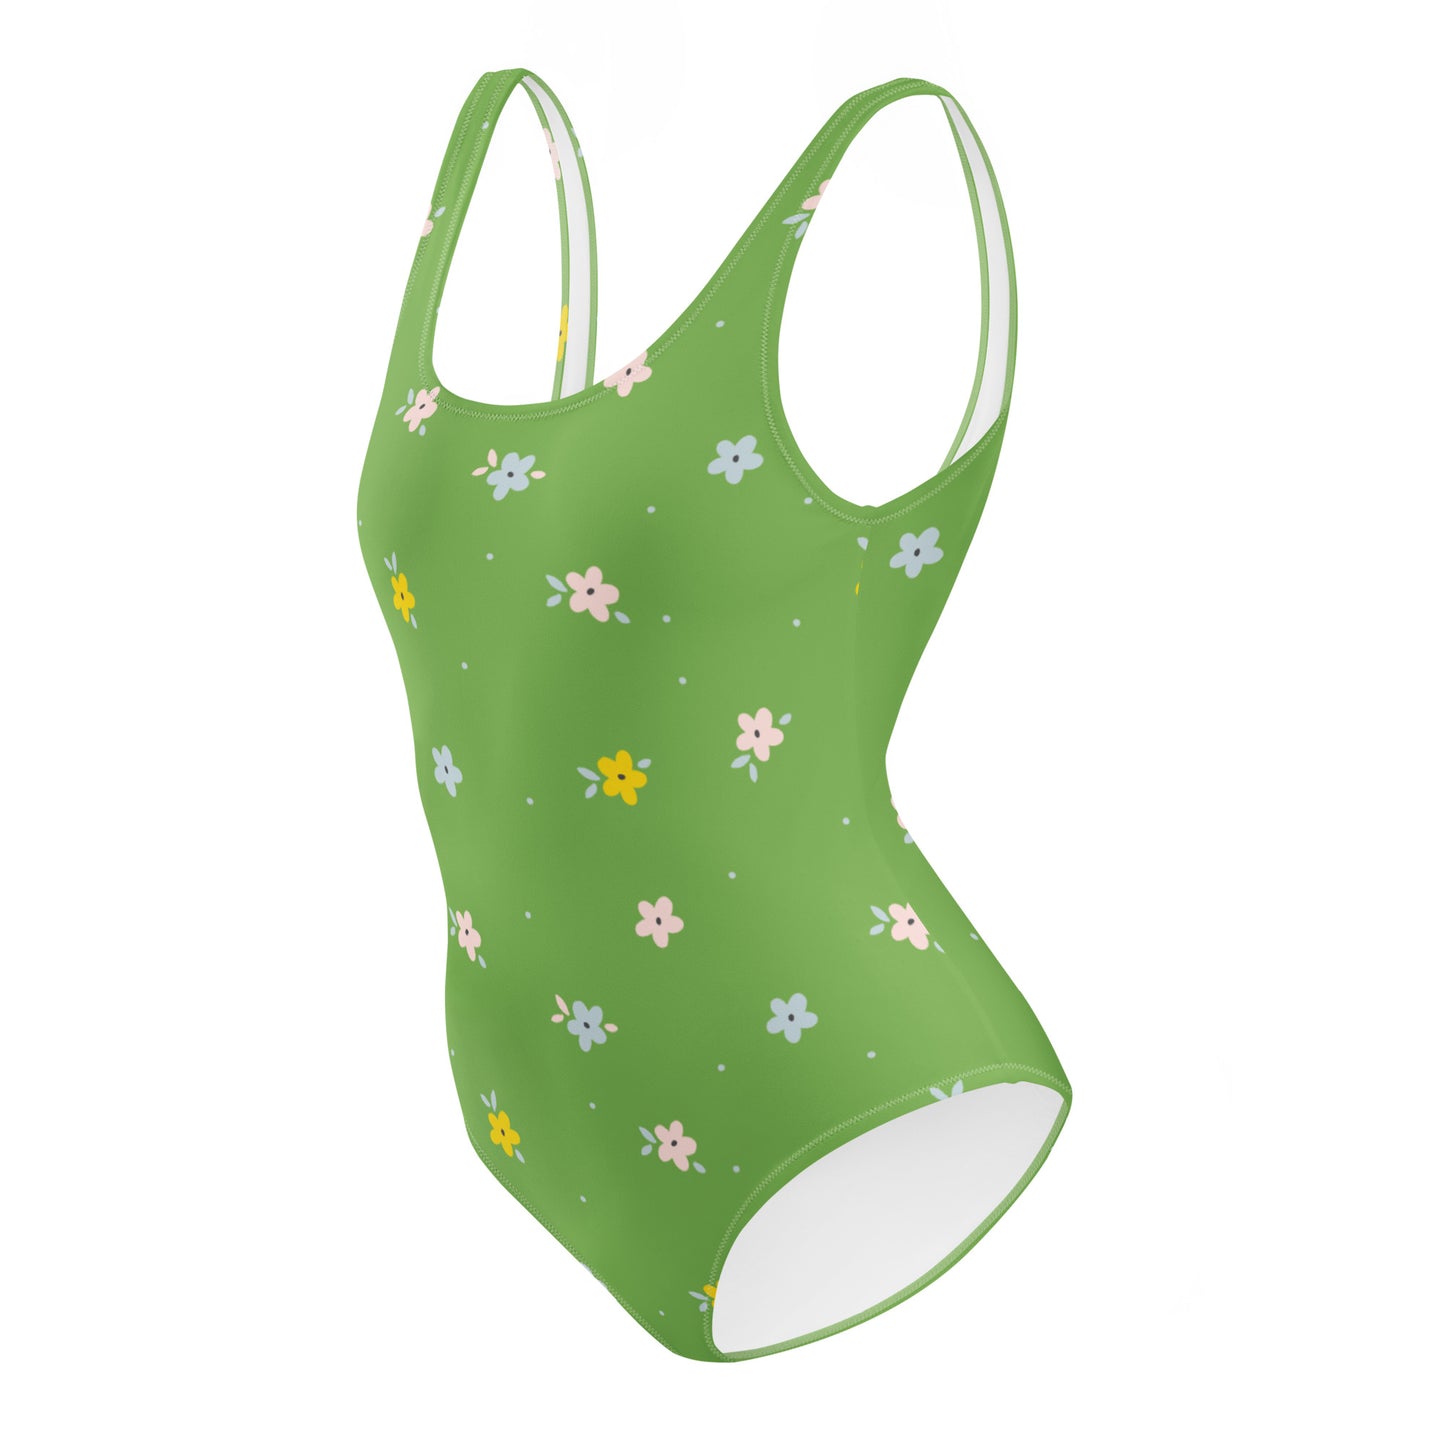 Spring Green One-Piece Swimsuit